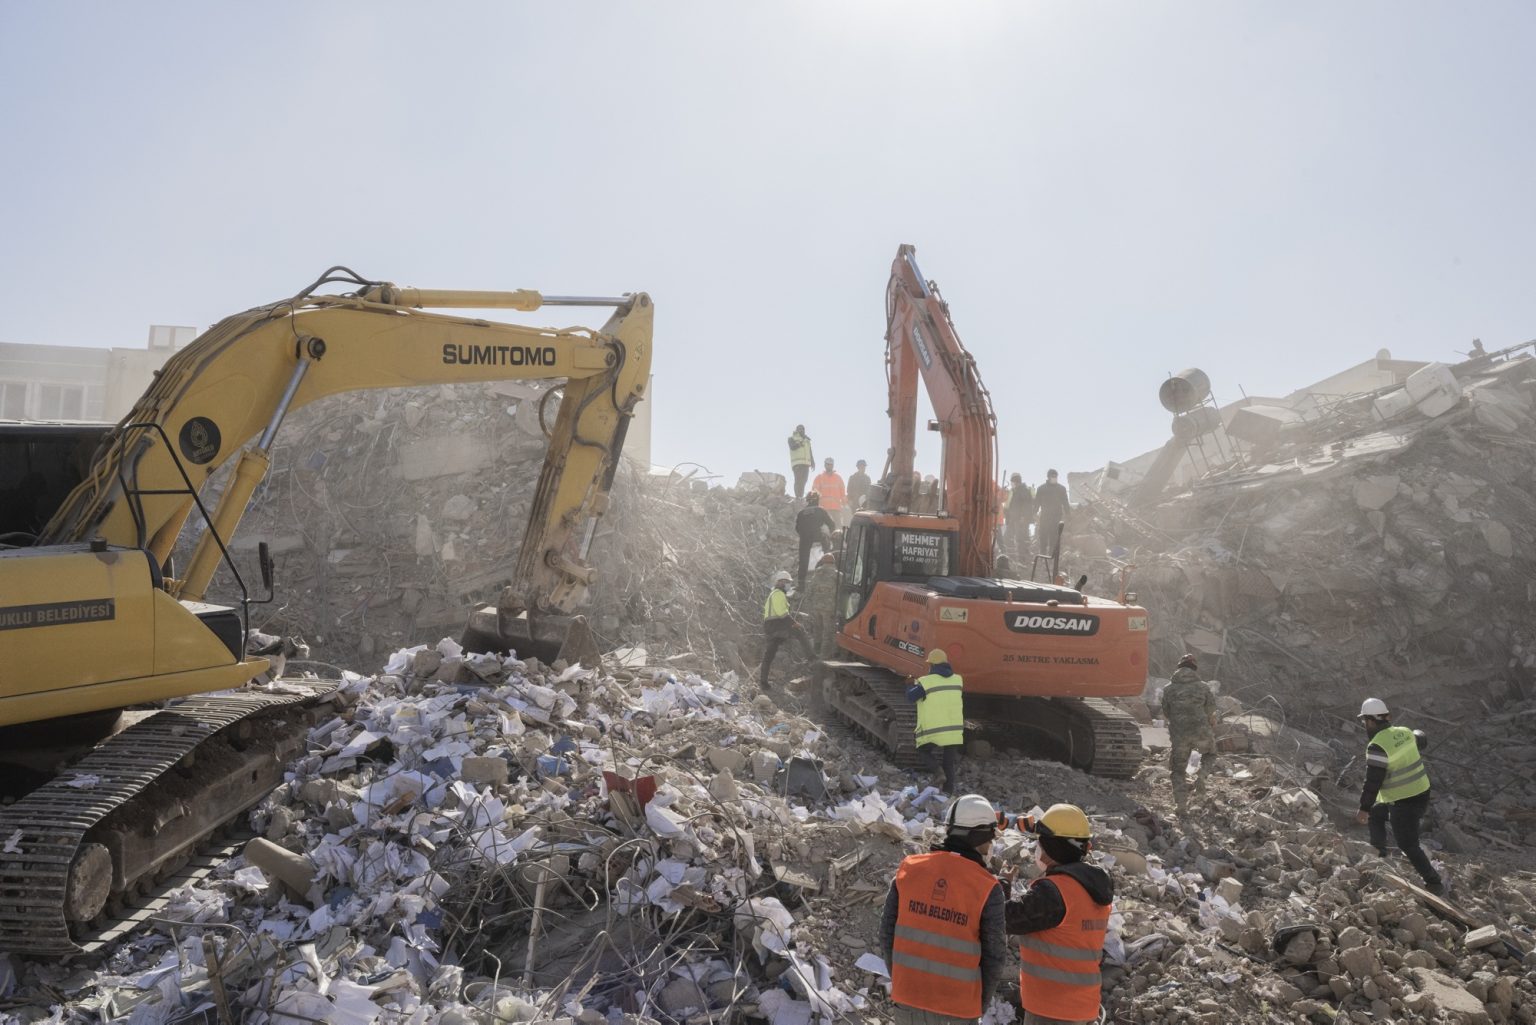 Adiyaman, Turkey, February 2023 - The aftermath of the earthquake that hit southern Turkey and northern Syria. Bulldozers and rescue teams remove debris to recover the dead bodies still under the debris. ><
Adiyaman, Turchia, febbraio 2023  Le conseguenze del terremoto che ha colpito la Turchia del Sud e la Siria del nord.